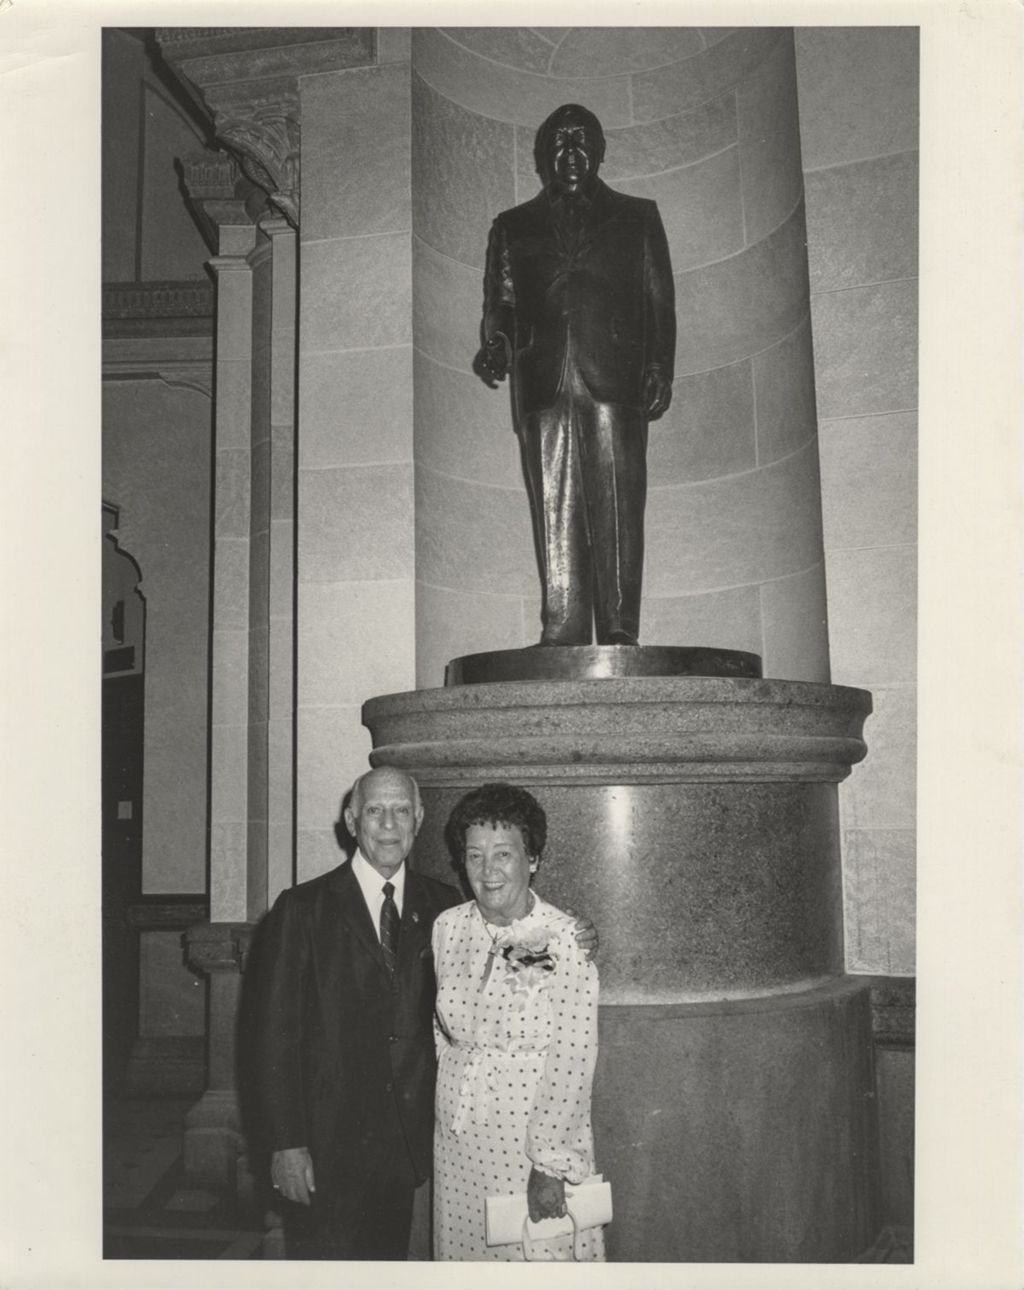 Miniature of Judge Marovitz and Eleanor Daley in front of the Richard J. Daley statue